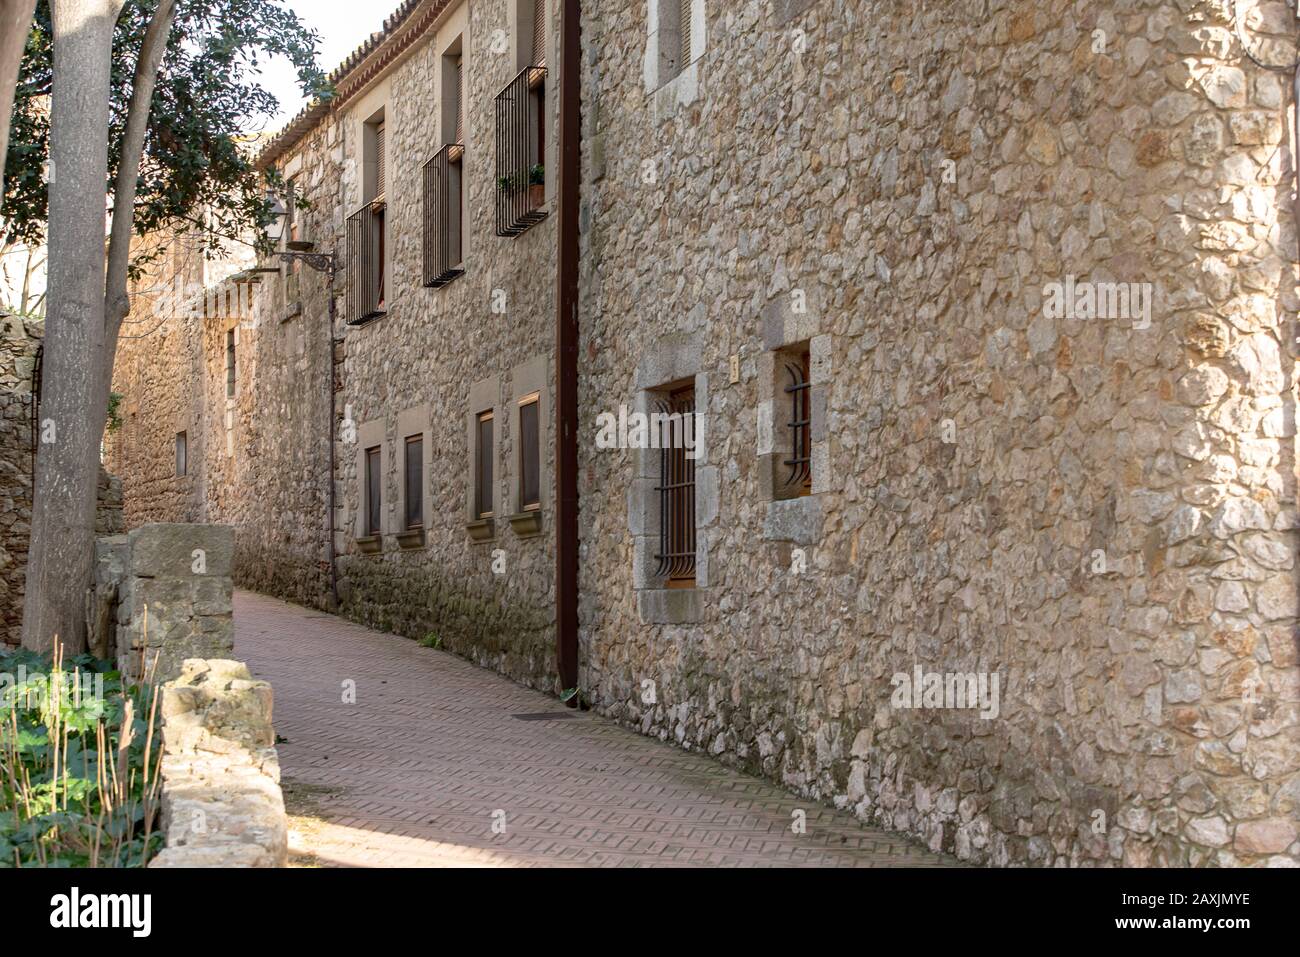 SANT MARTI D'EMPÚRIES, GIRONA, SPAIN: 2020 FEBRUARY 8: SUNNY DAY IN THE OLD CITY OF SANT MARTI DE AMPURIES, GIRONA, SPAIN Stock Photo